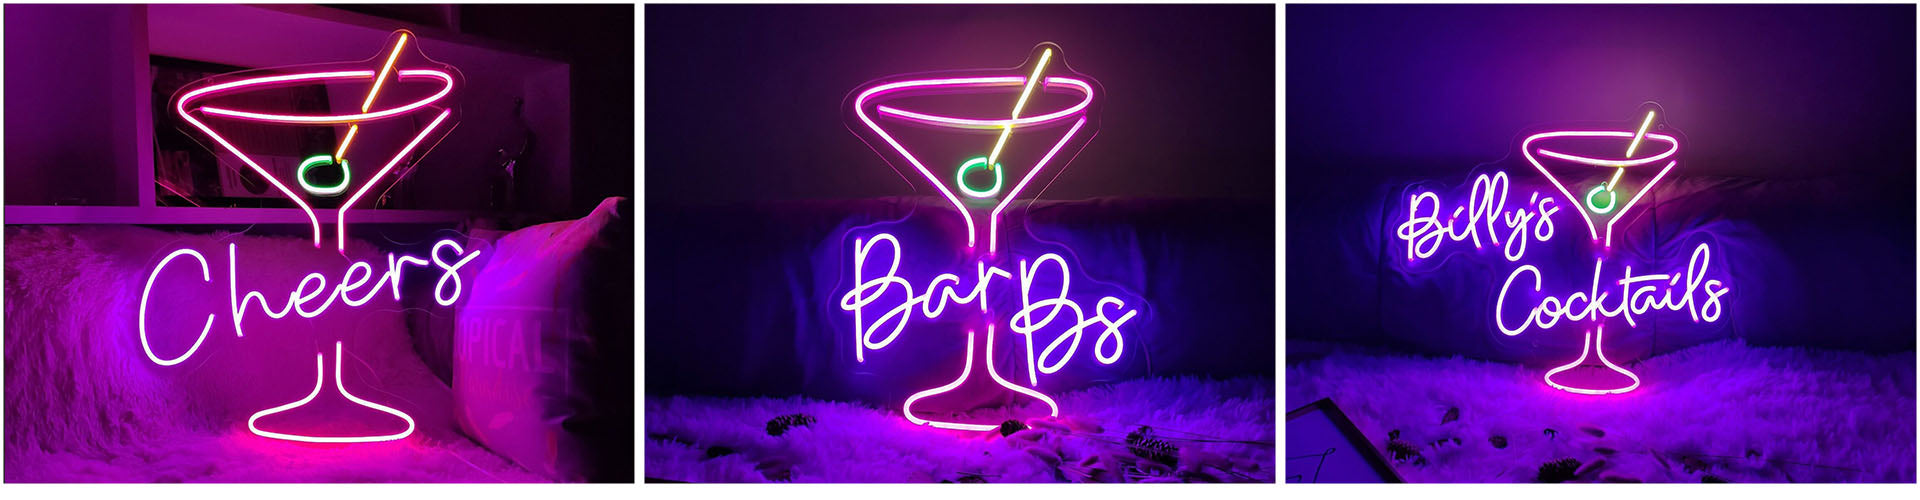 Cocktails&Cheers neon wall art for bar